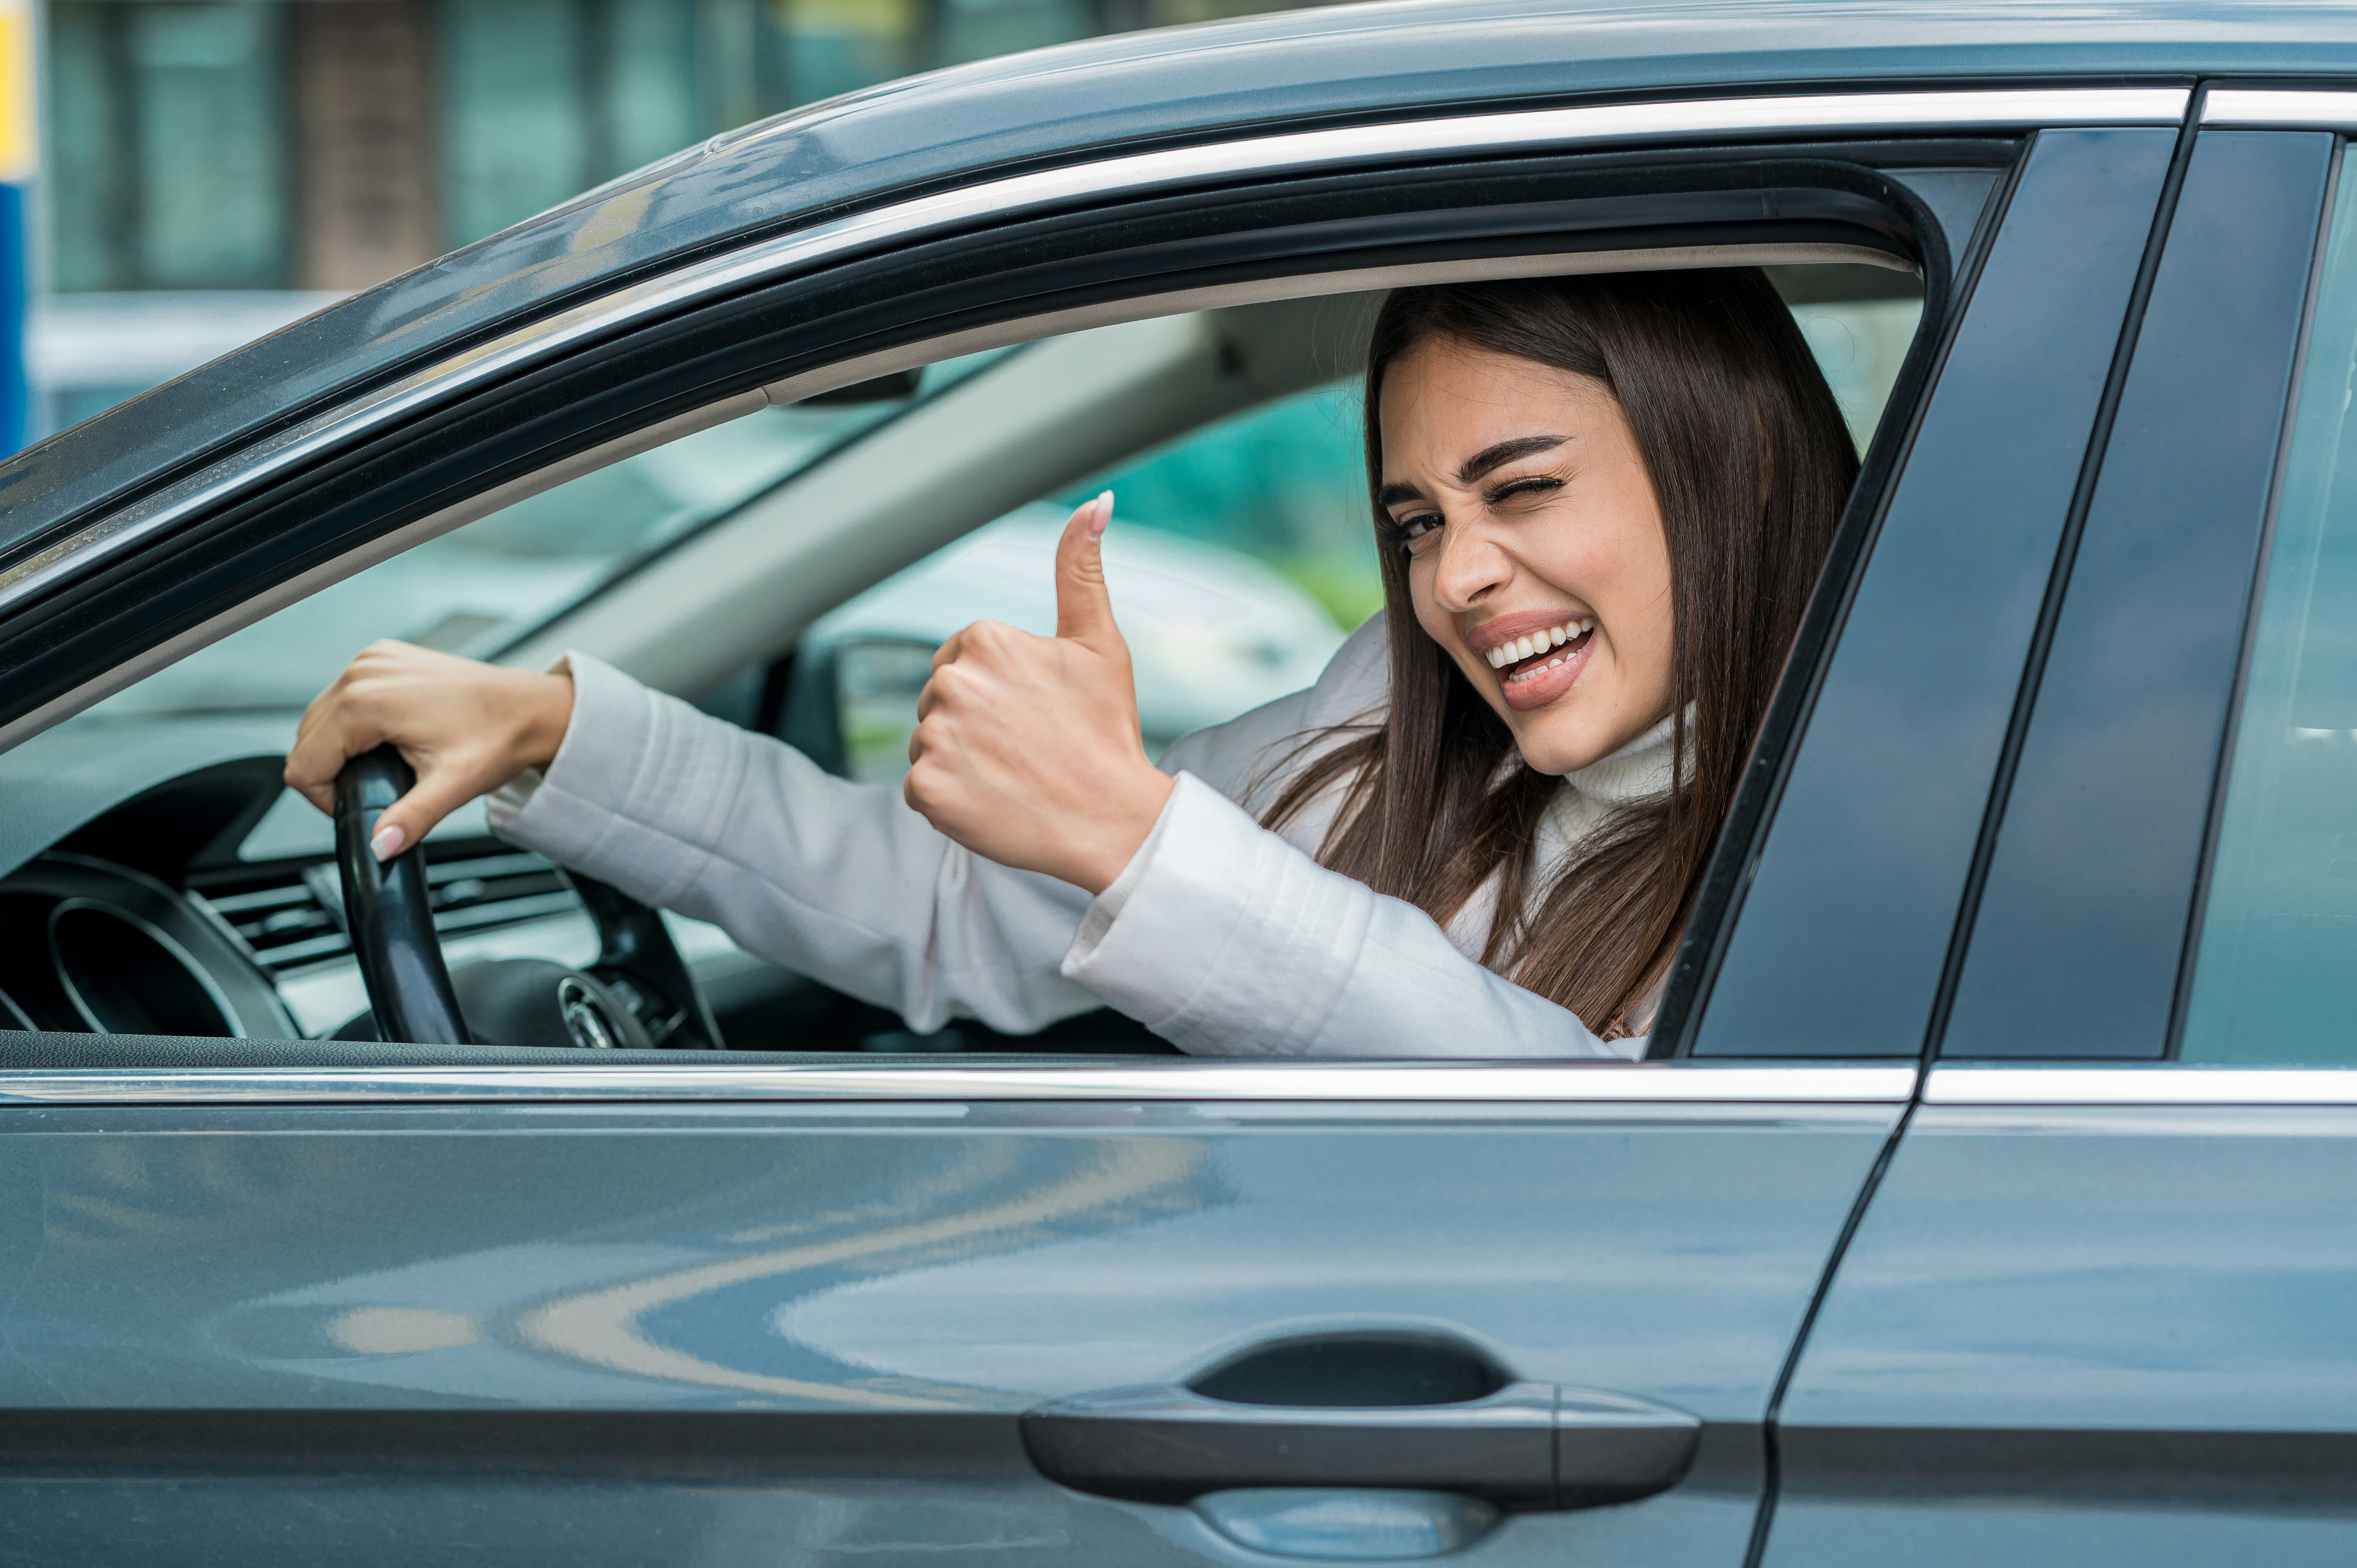 Adult Safe Driving Lessons